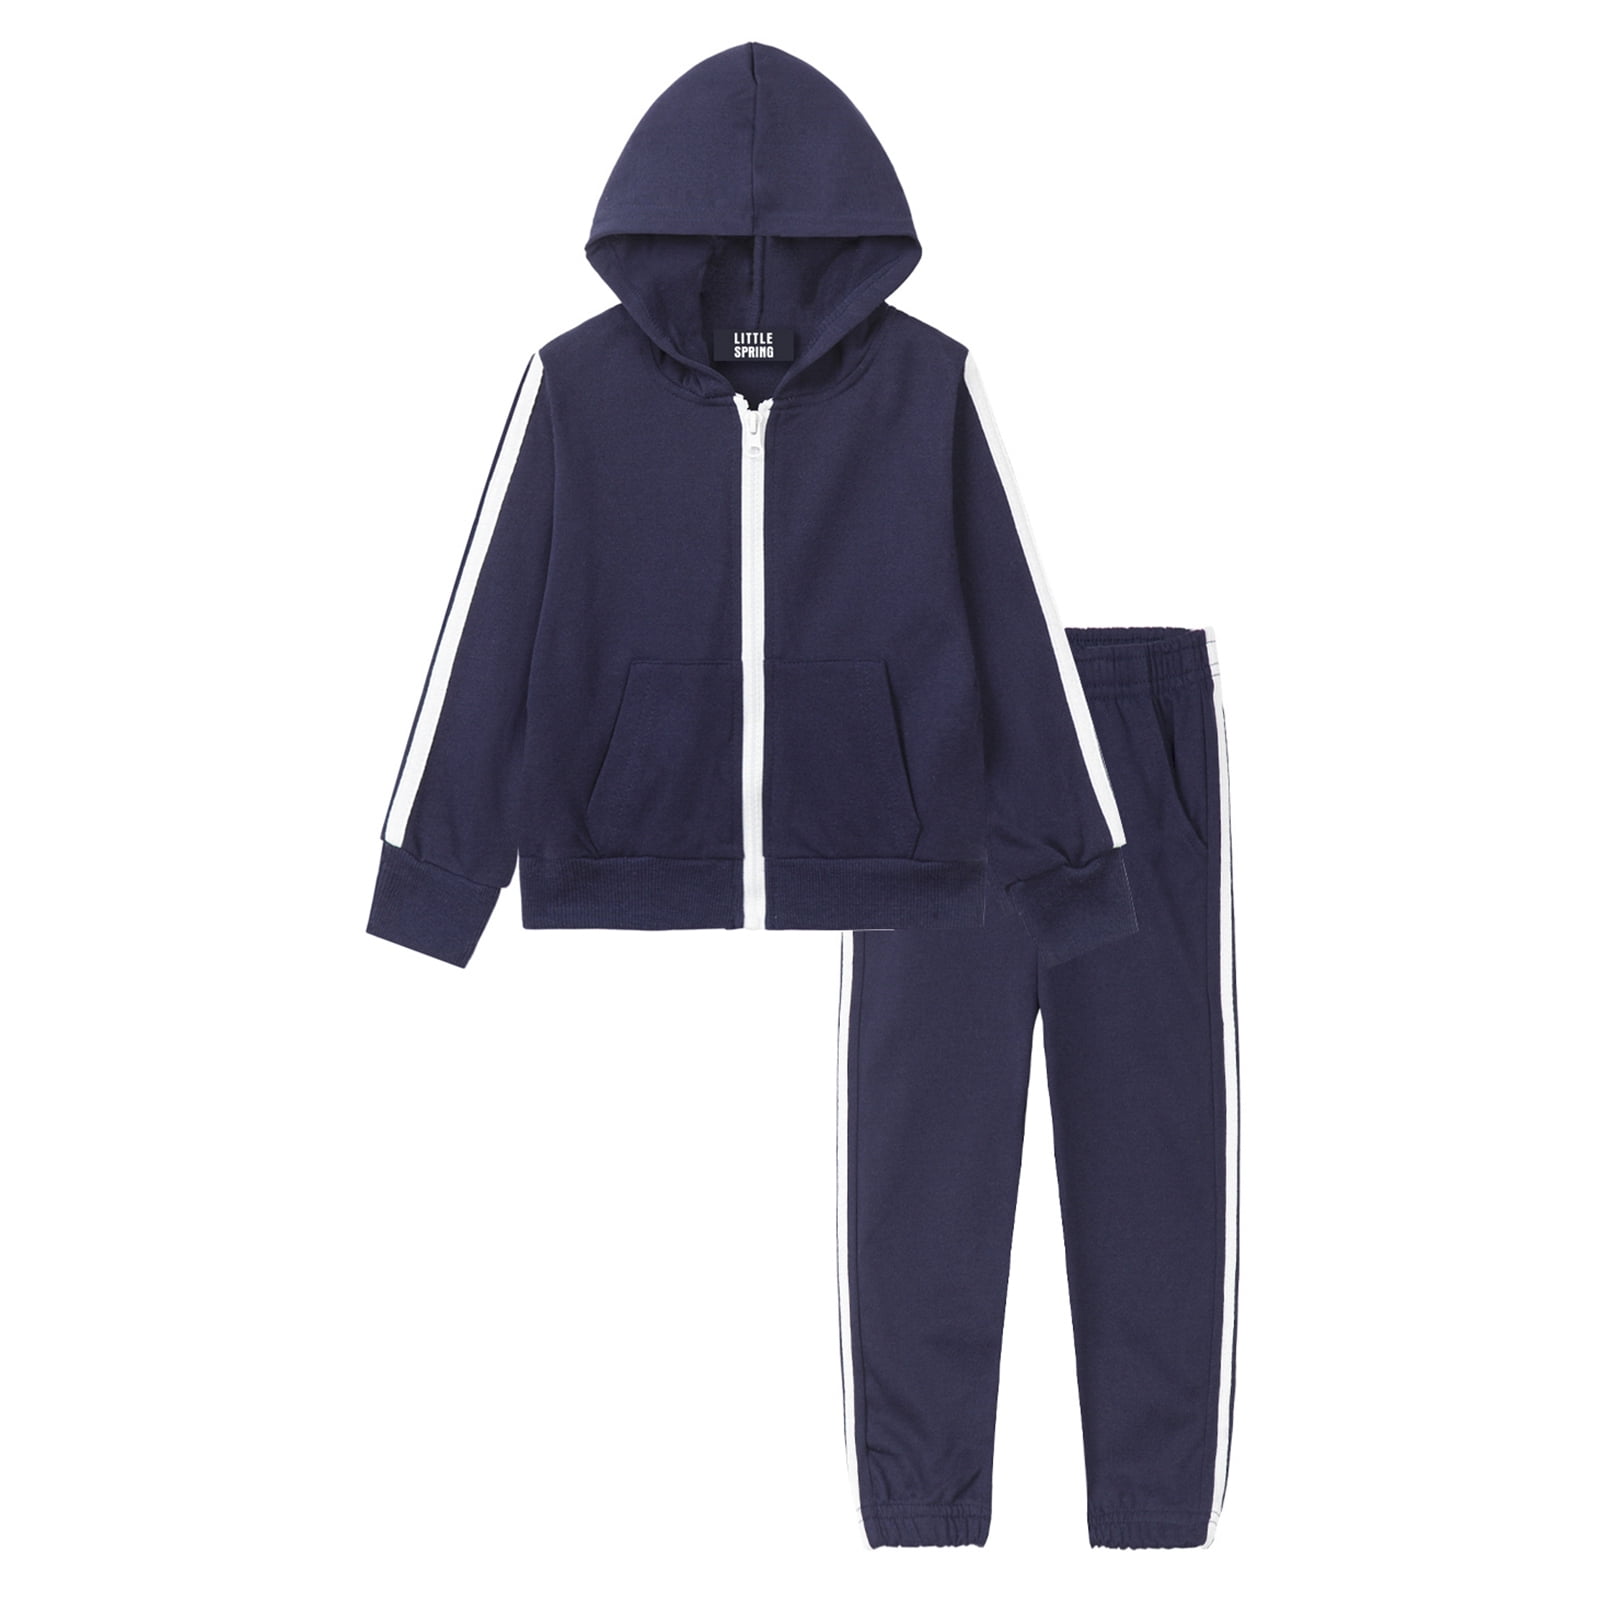 LittleSpring Toddler Boys Hoodie Sweatsuit and Pants Set 2 Pieces  Tracksuits Zip up Cotton Soft 4T Navy Blue 